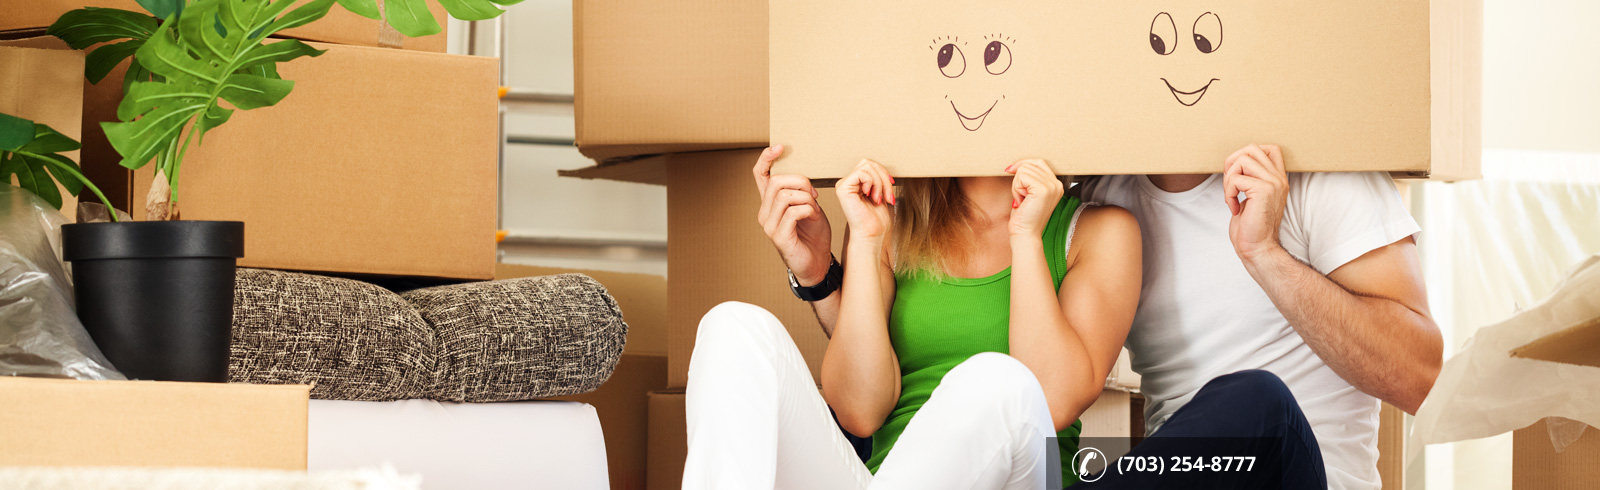 Best Client Services Offered by Allstate Movers Northern VA